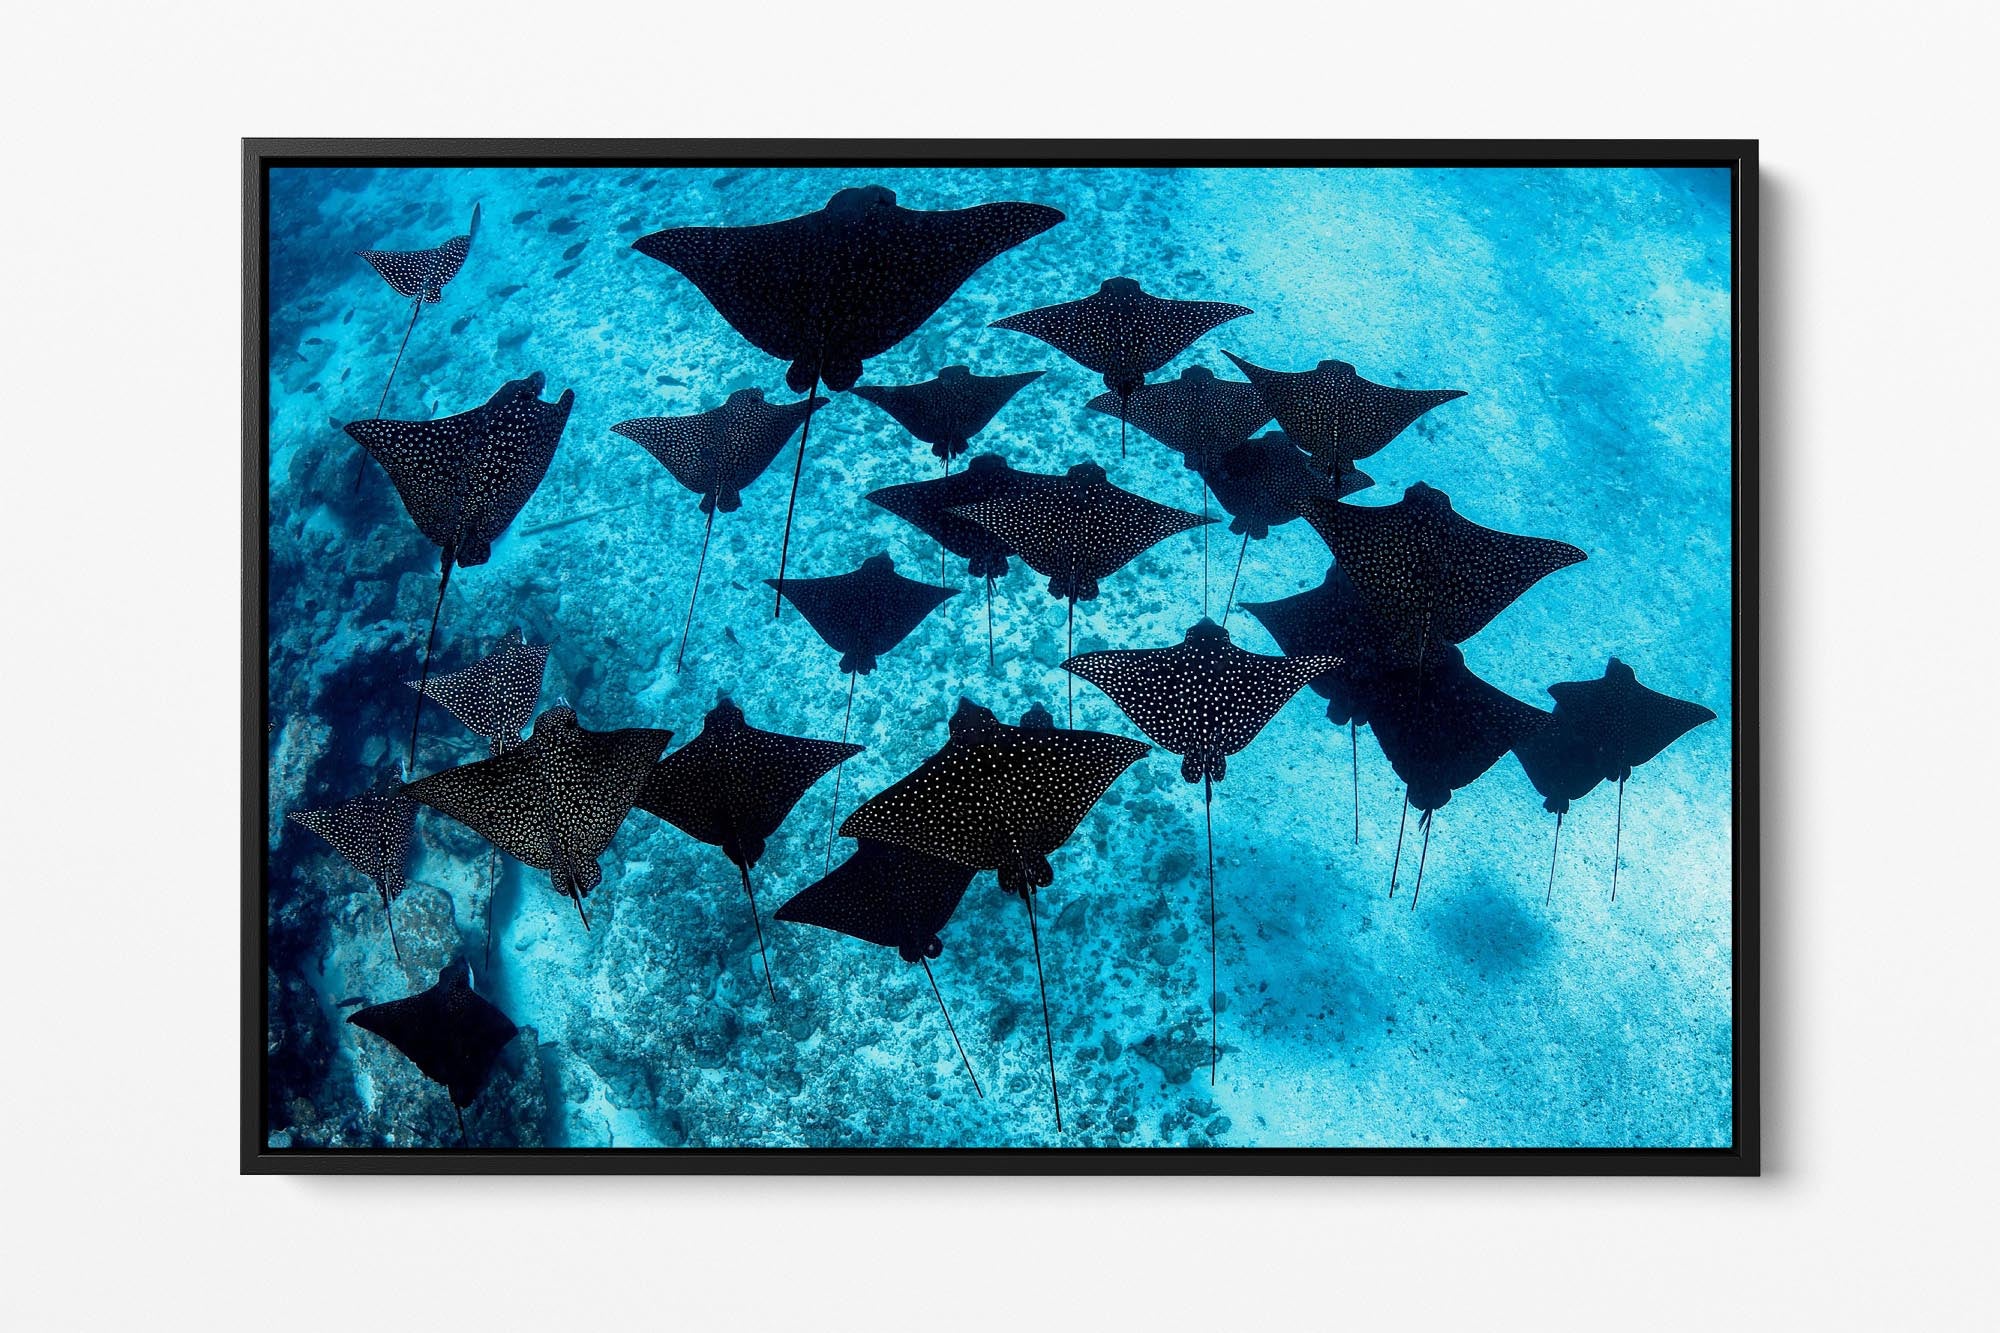 Spotted Eagle Rays French Polynesia